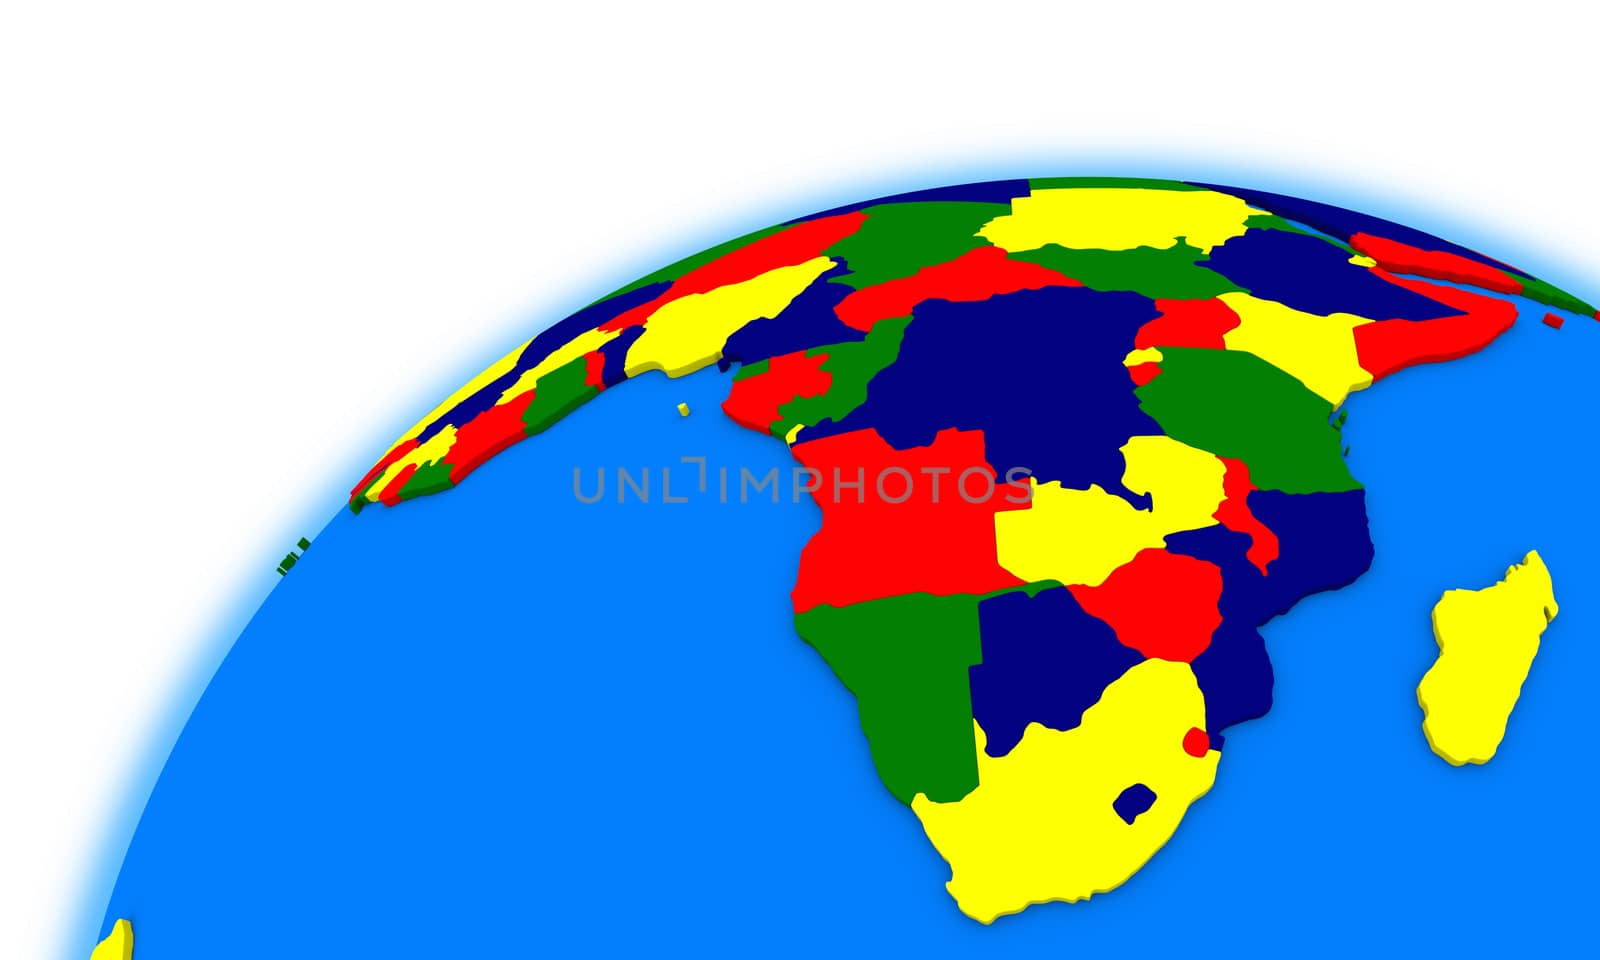 south Africa on globe, political map